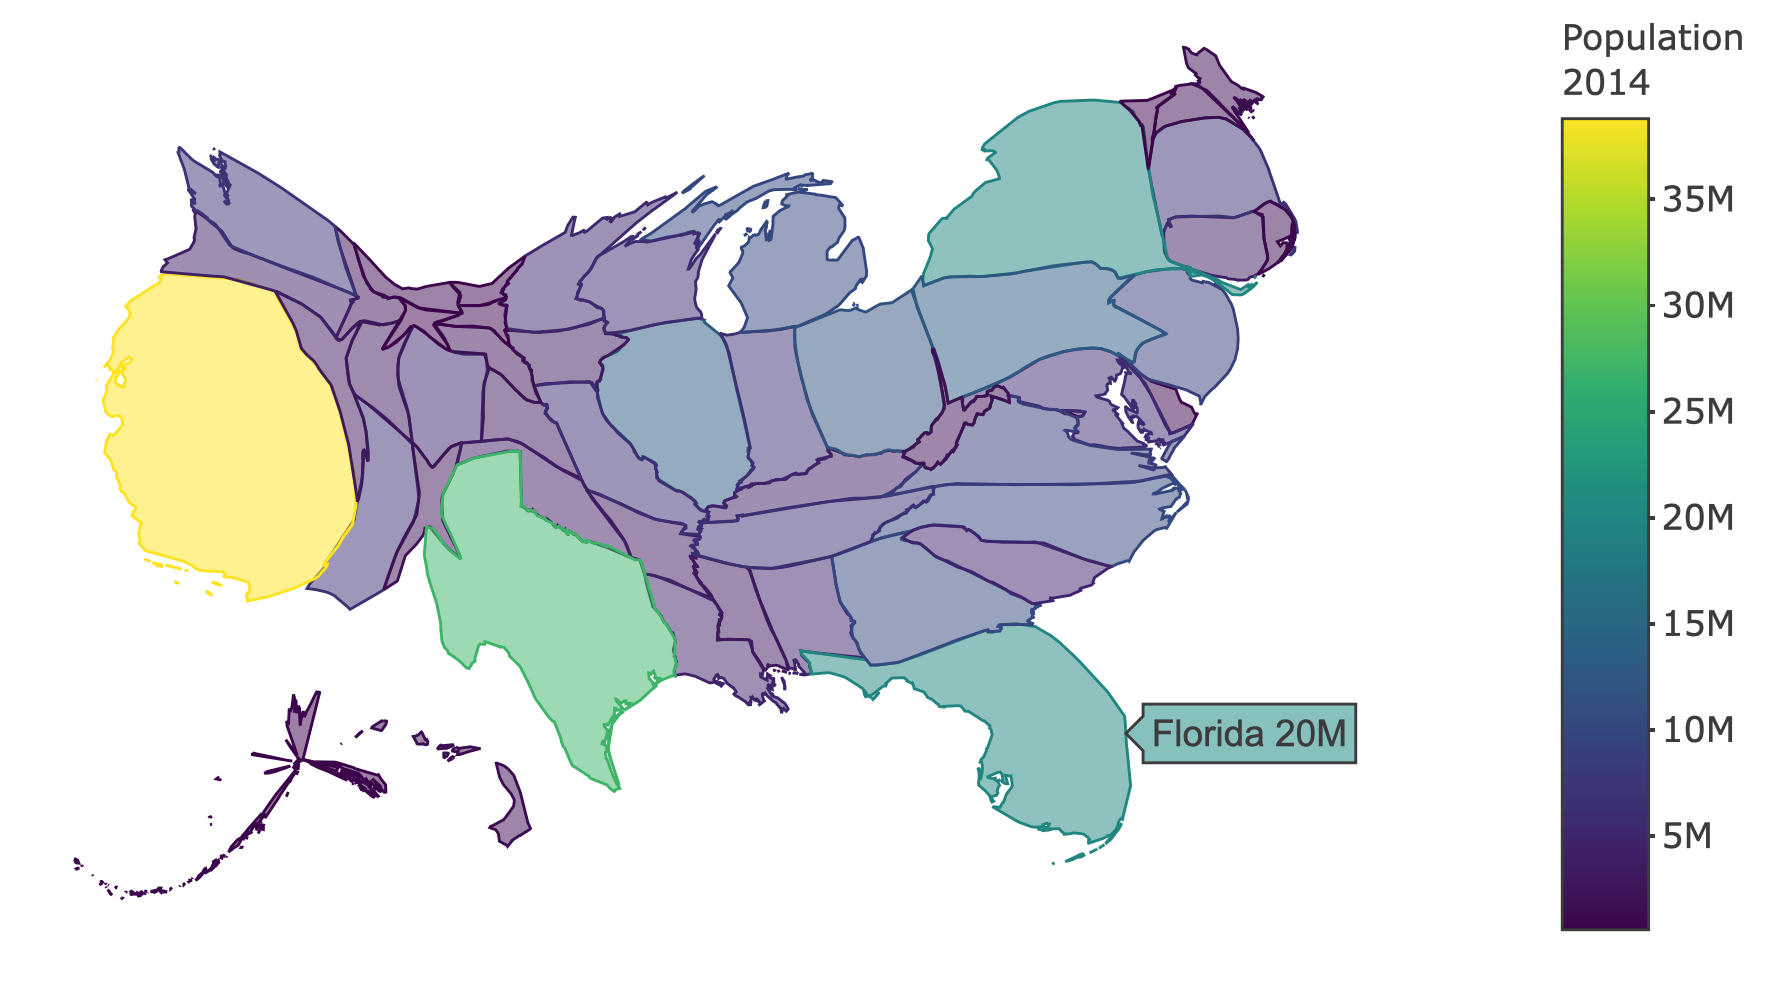 A cartogram of US population in 2014. A cartogram sizes the area of geo-spatial objects proportional to some metric (e.g., population).